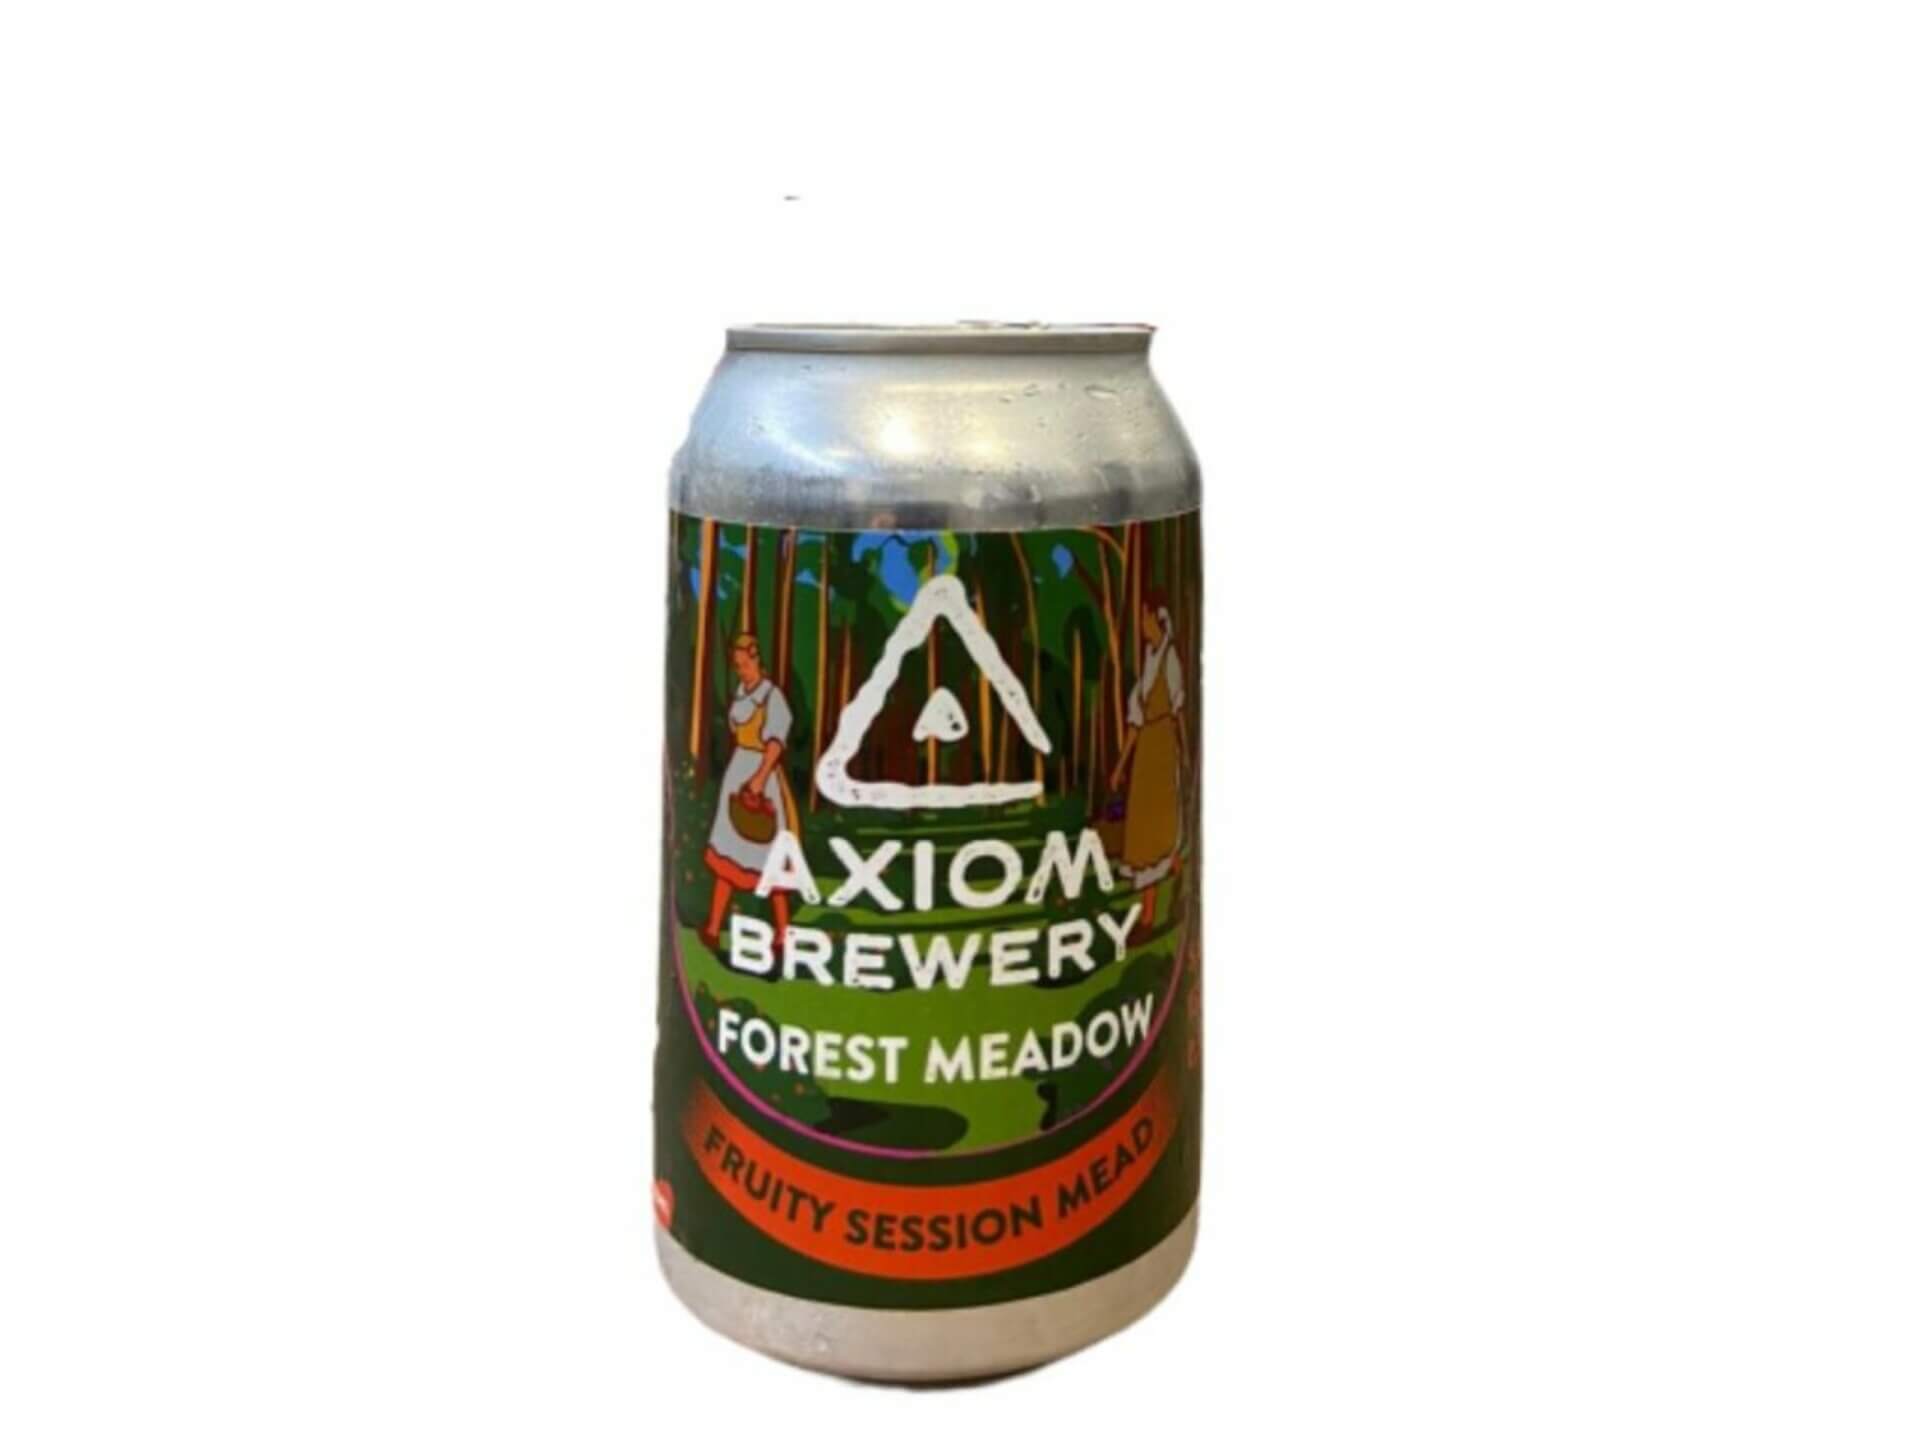 Axiom Brewery Forest Meadow 15°P